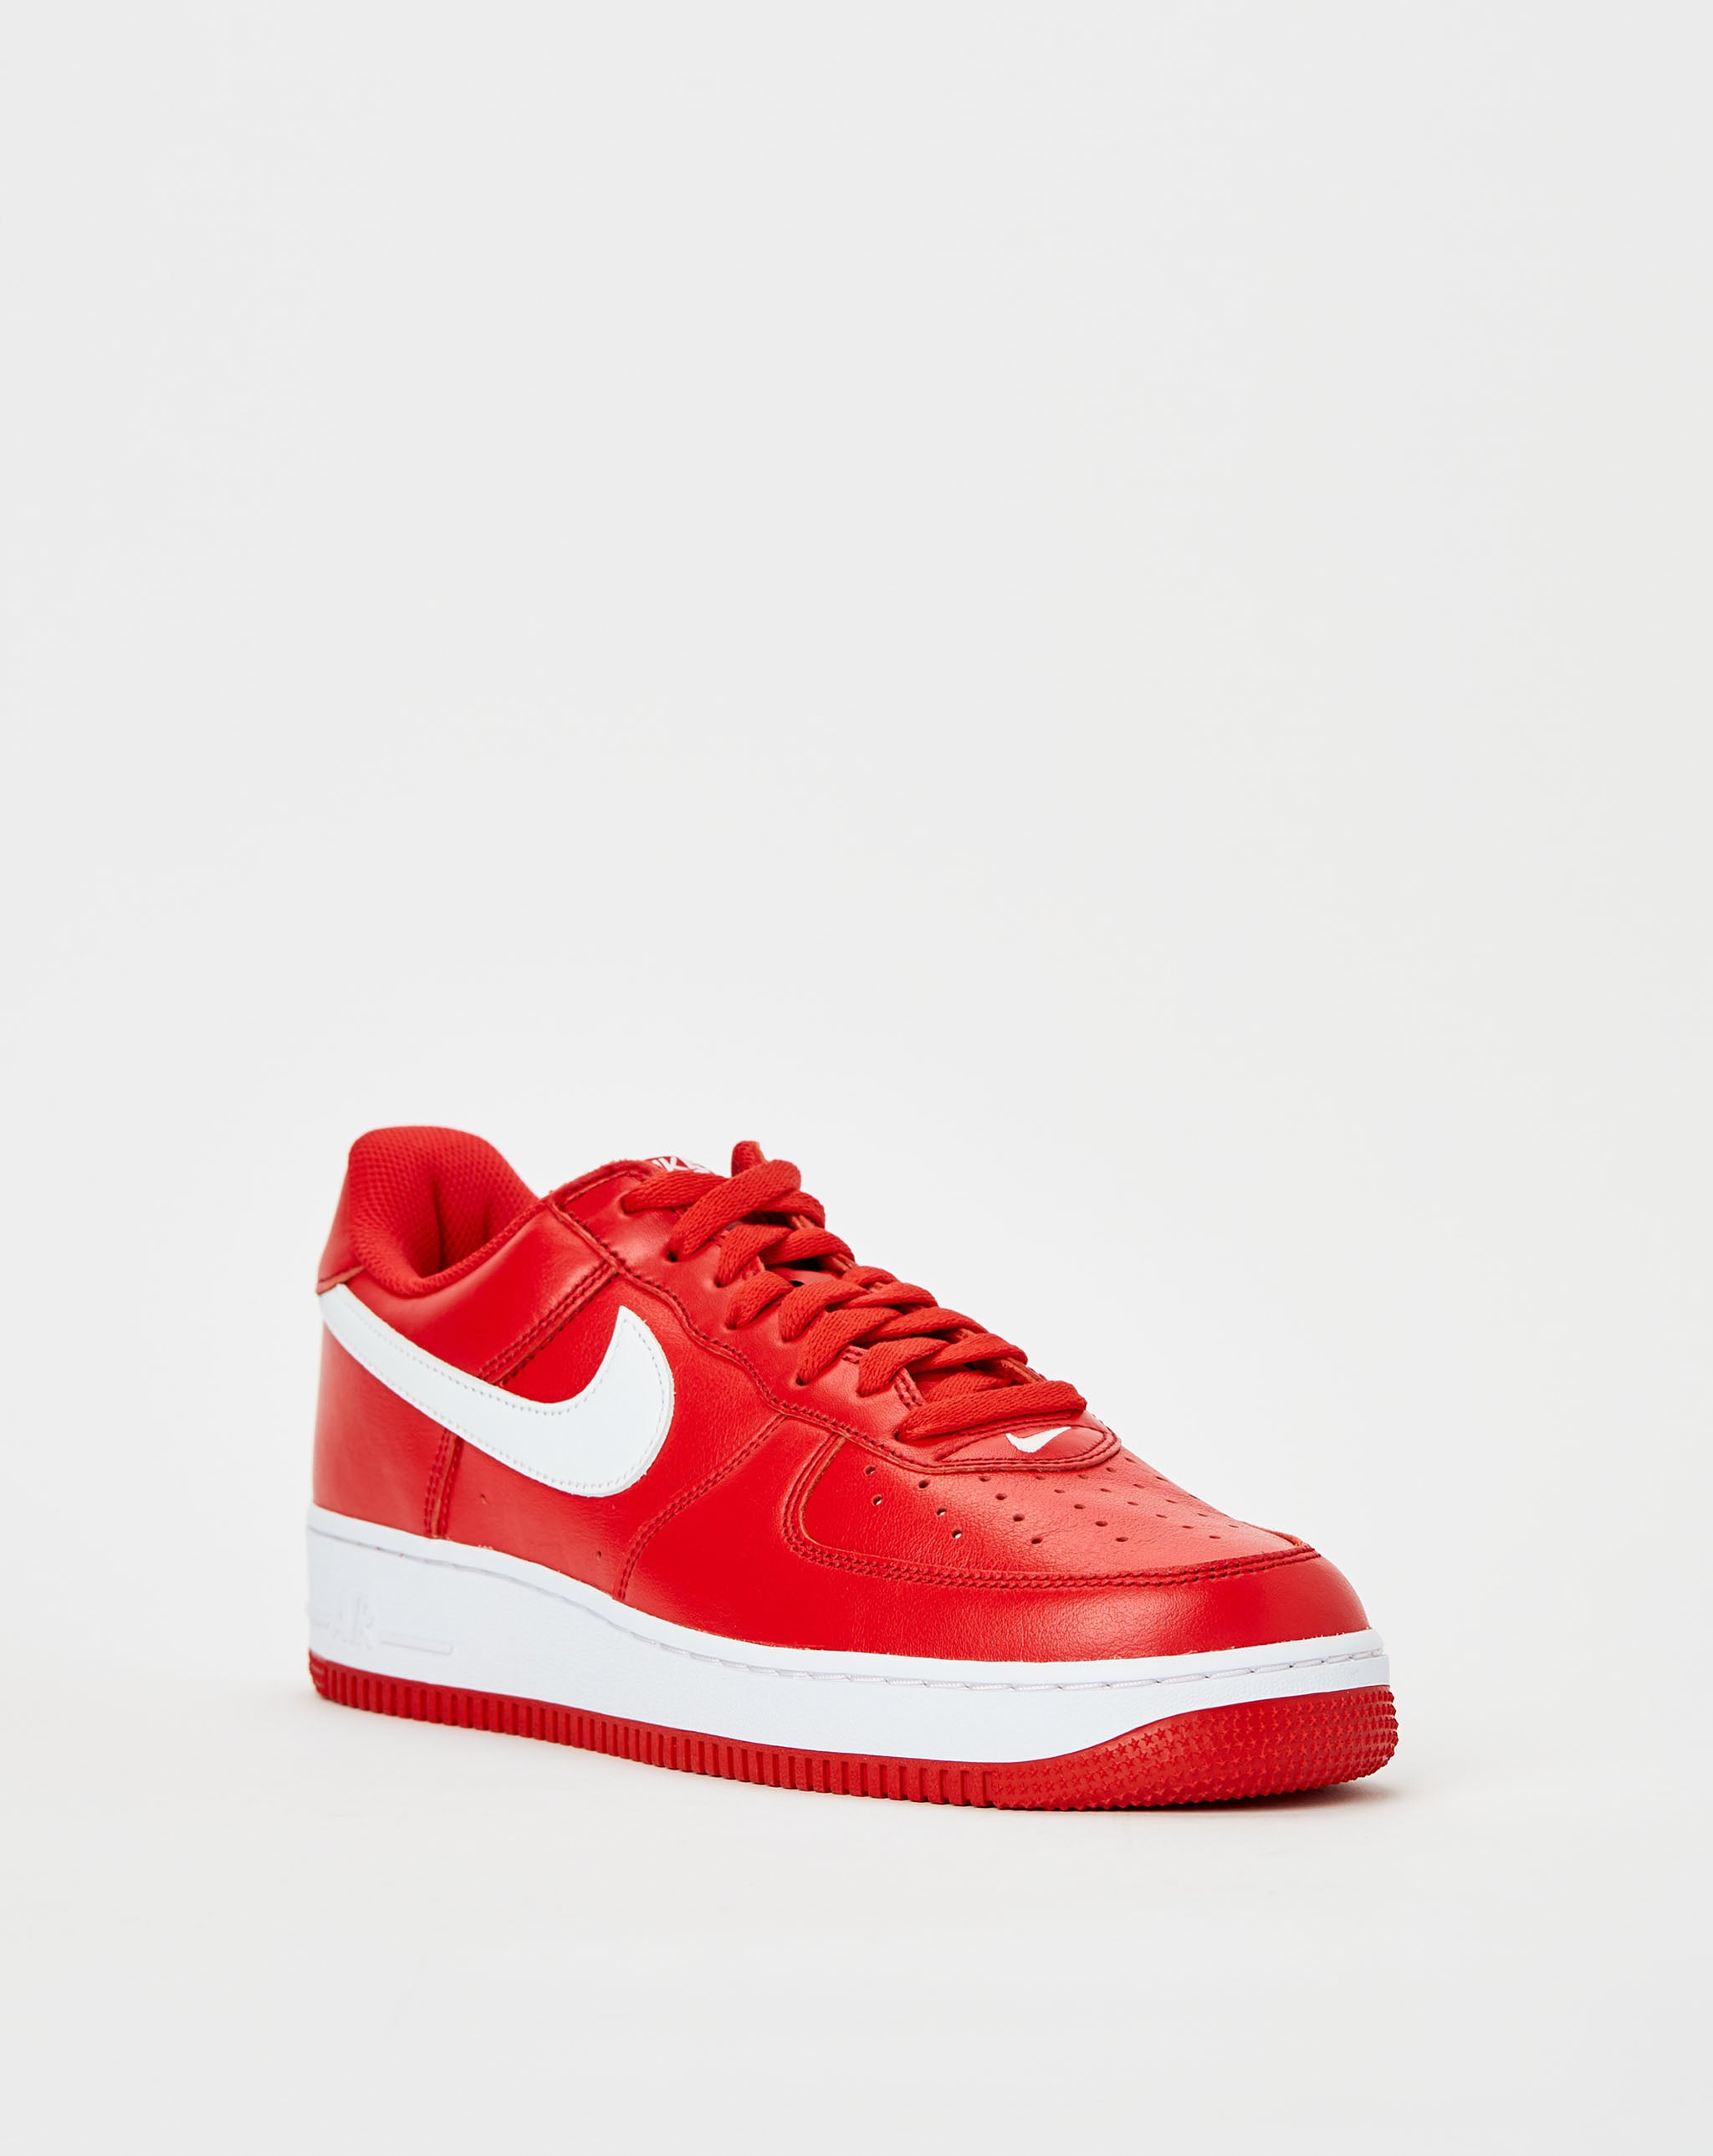 Air Force 1 '07 LV8 - Rule of Next